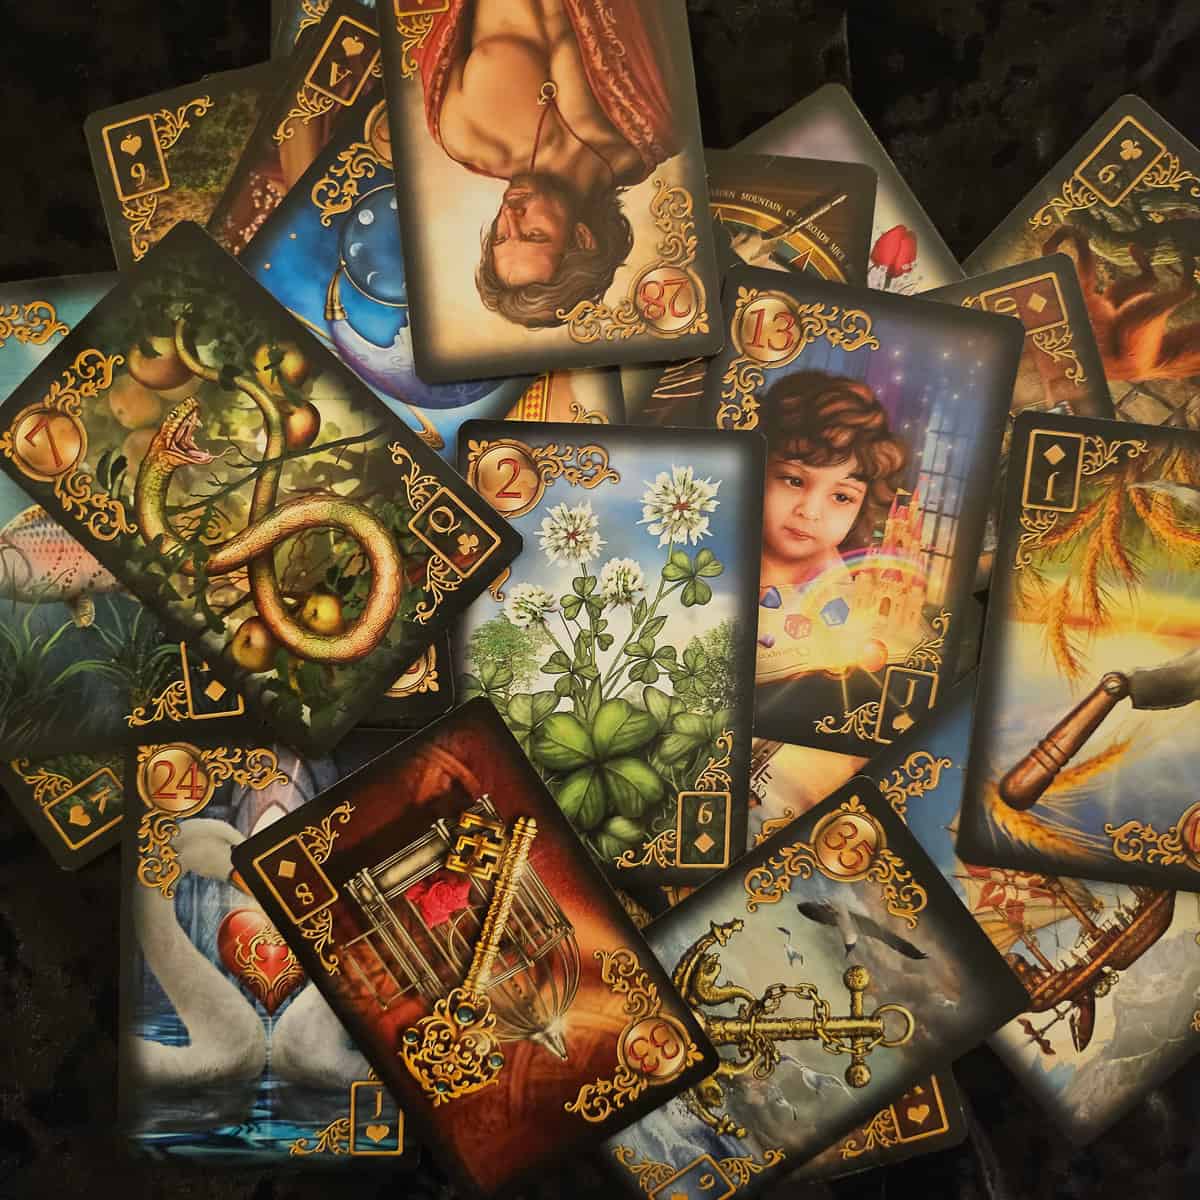 Cards of the Lenormand tarot deck.